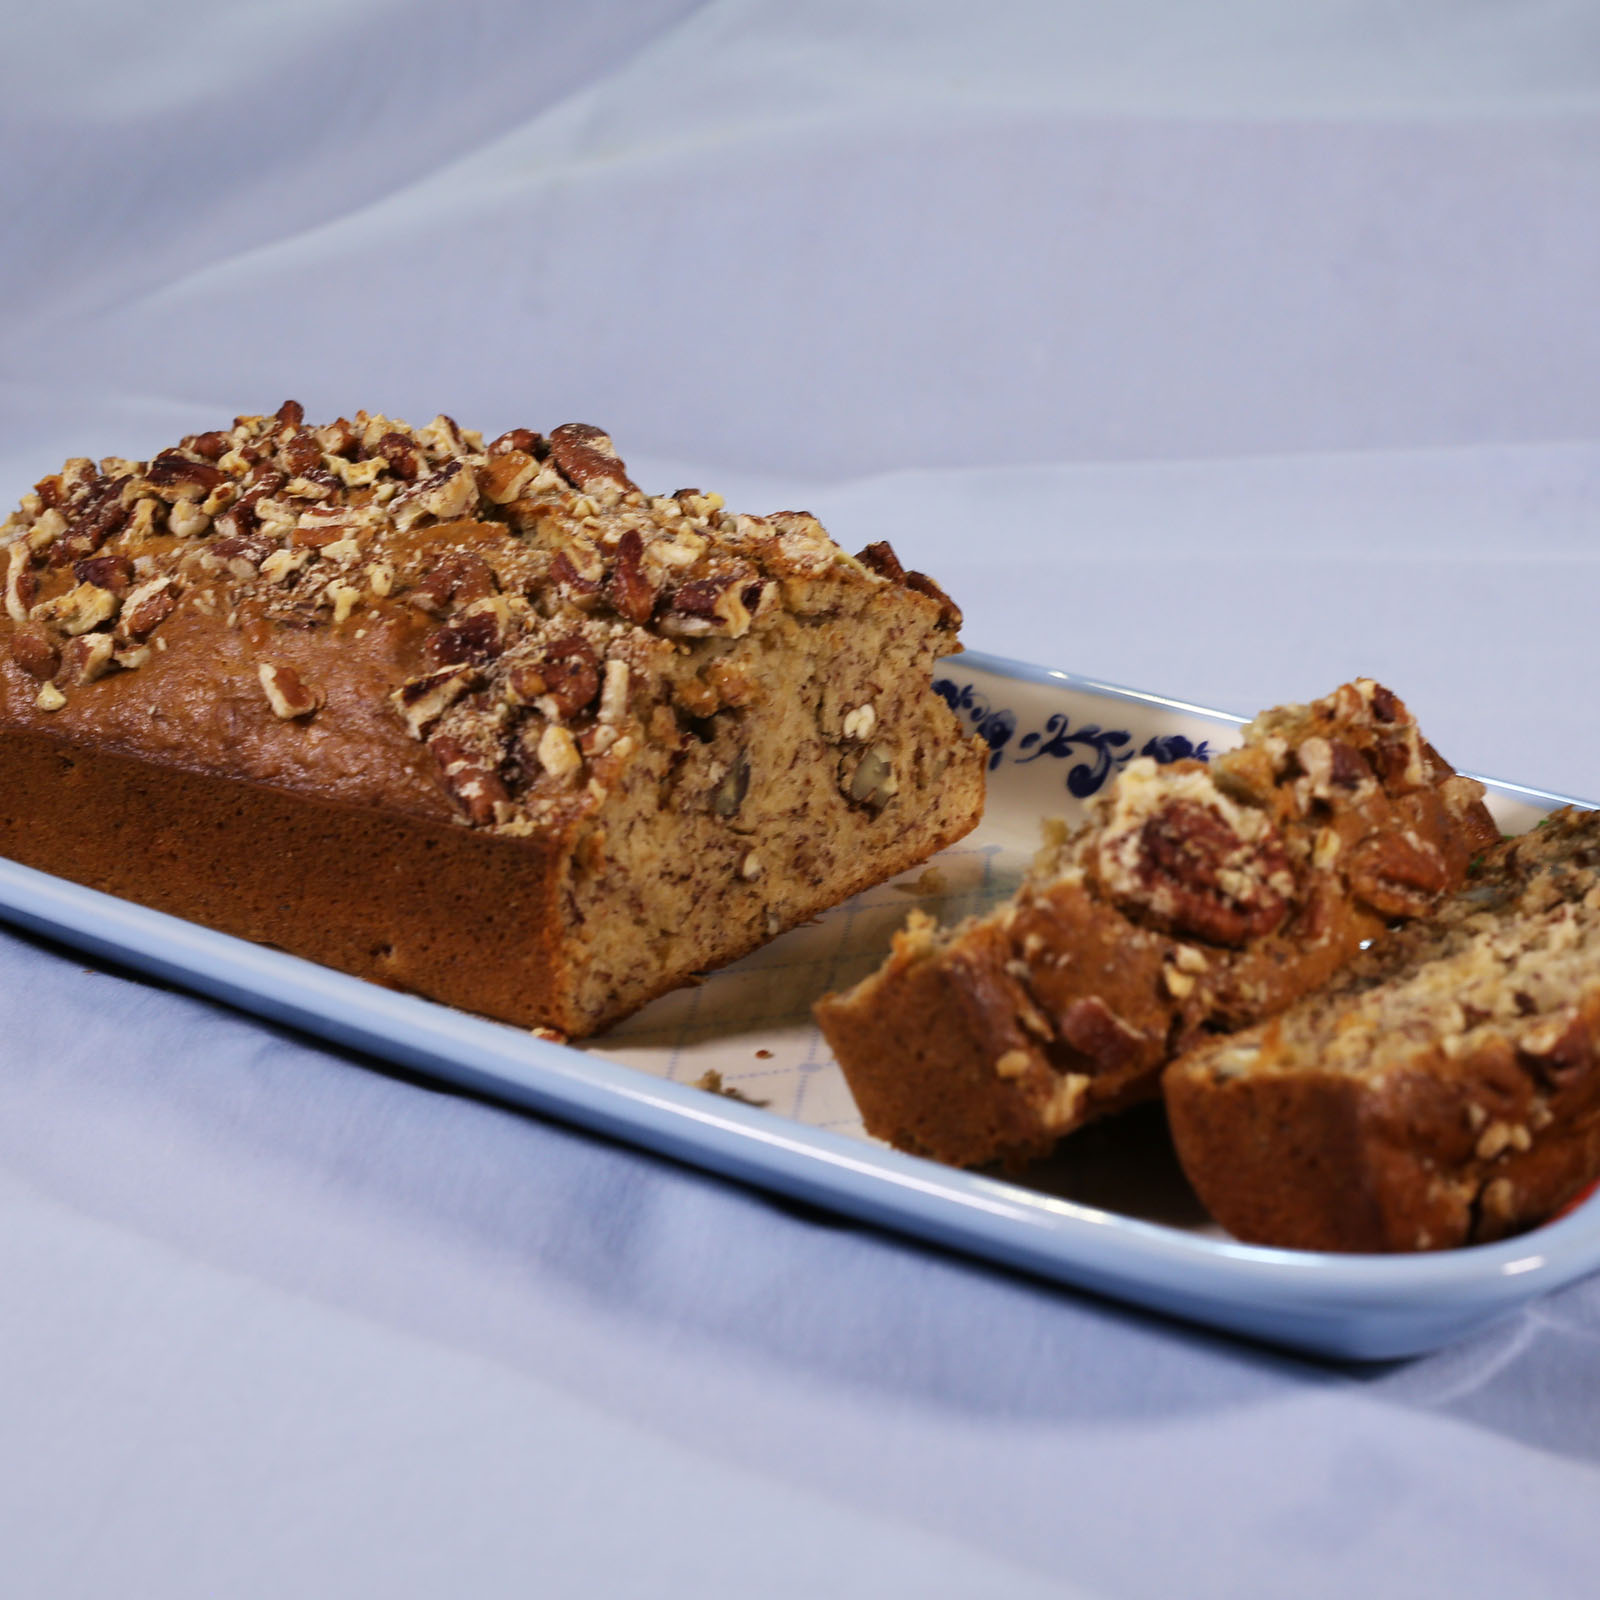 Banana Nut Bread is very tasty and satisfying.